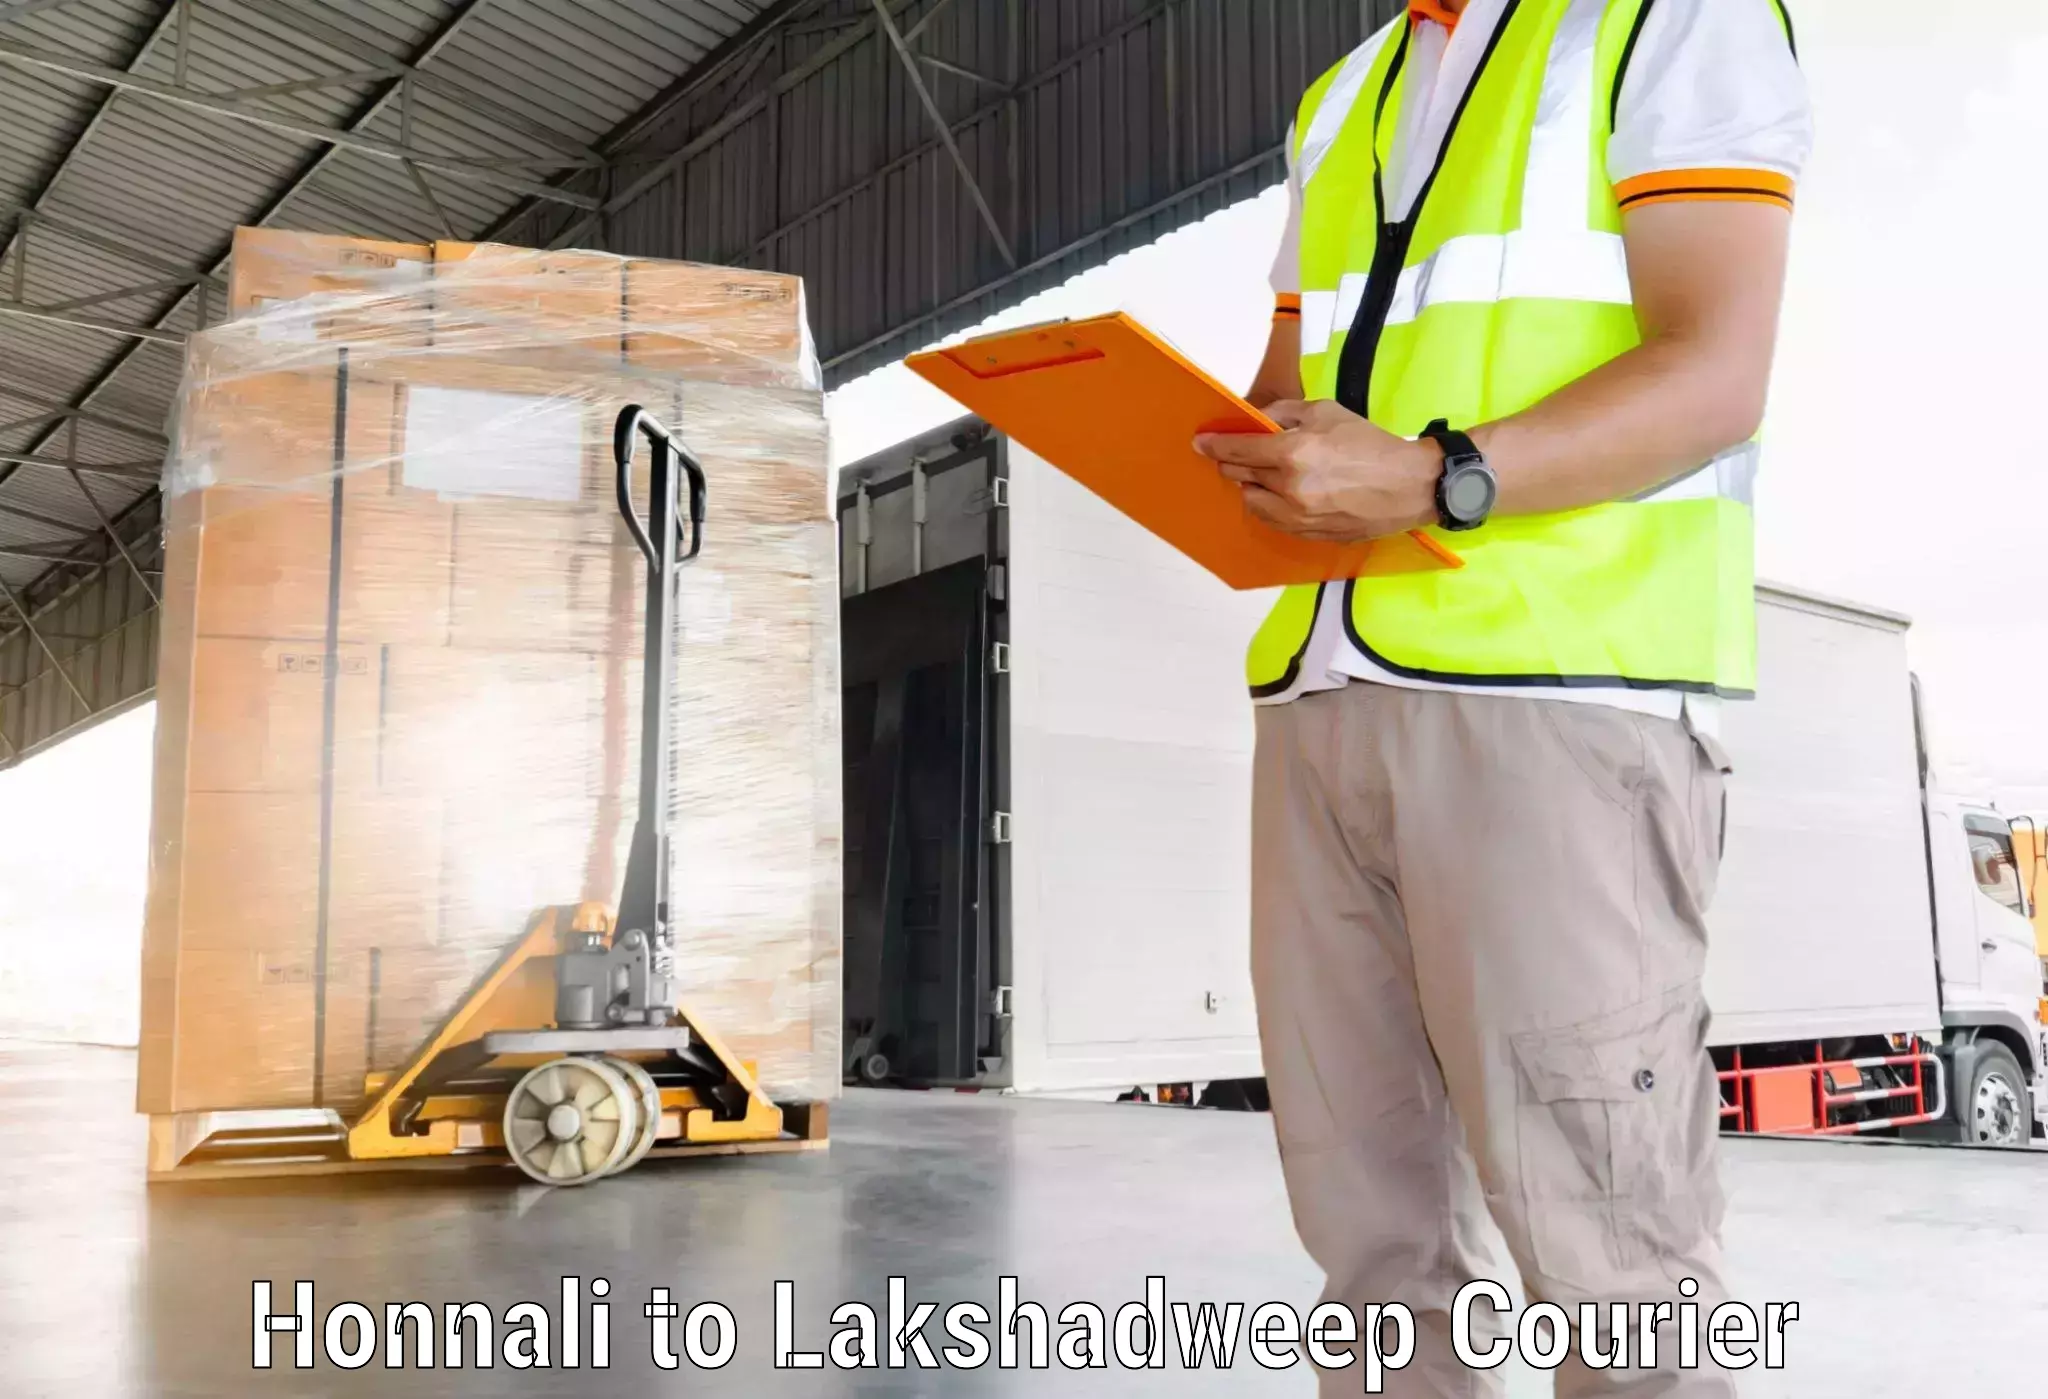 Express delivery capabilities Honnali to Lakshadweep